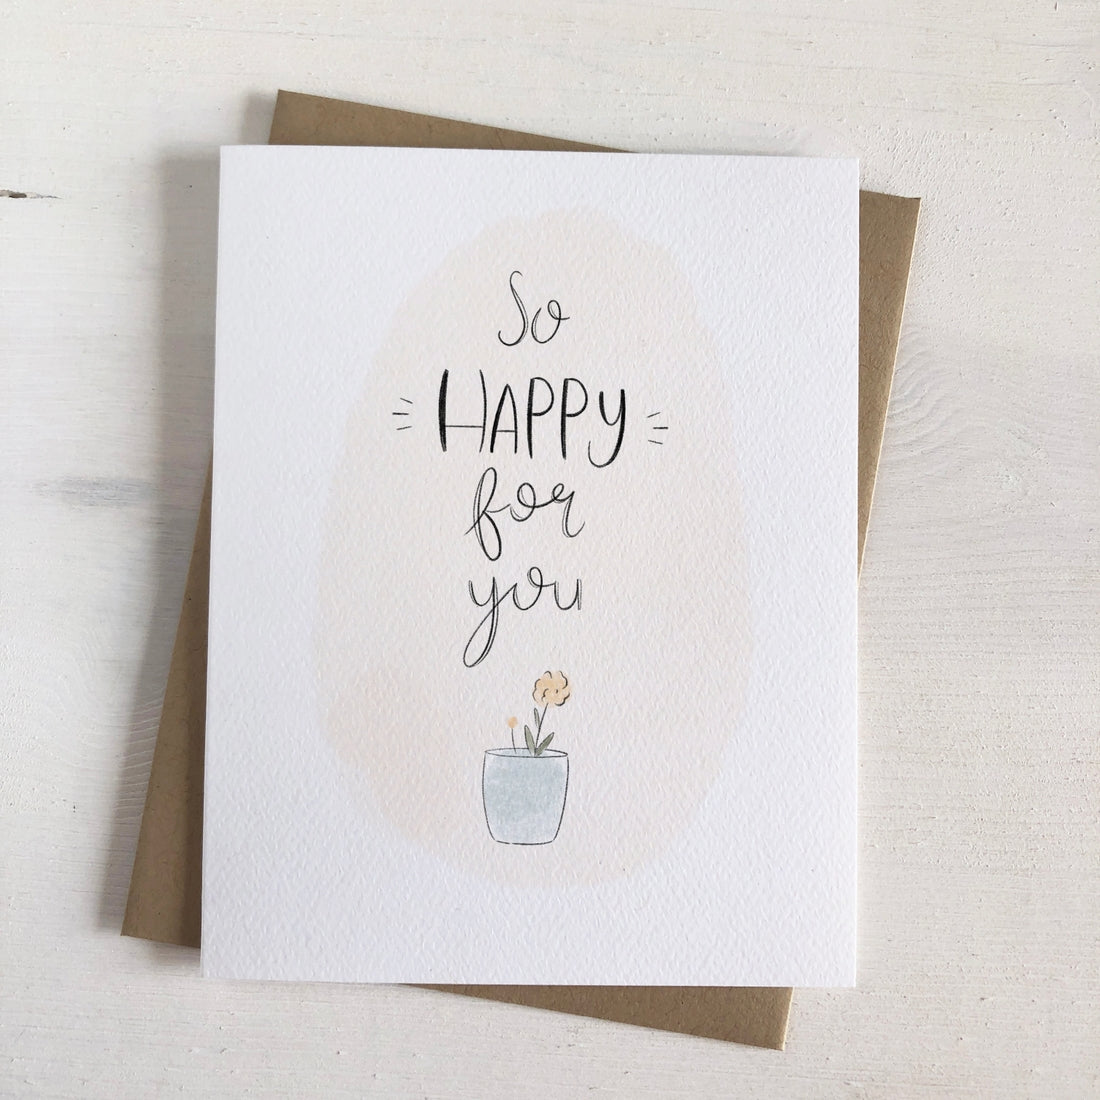 So Happy For You Greeting Card